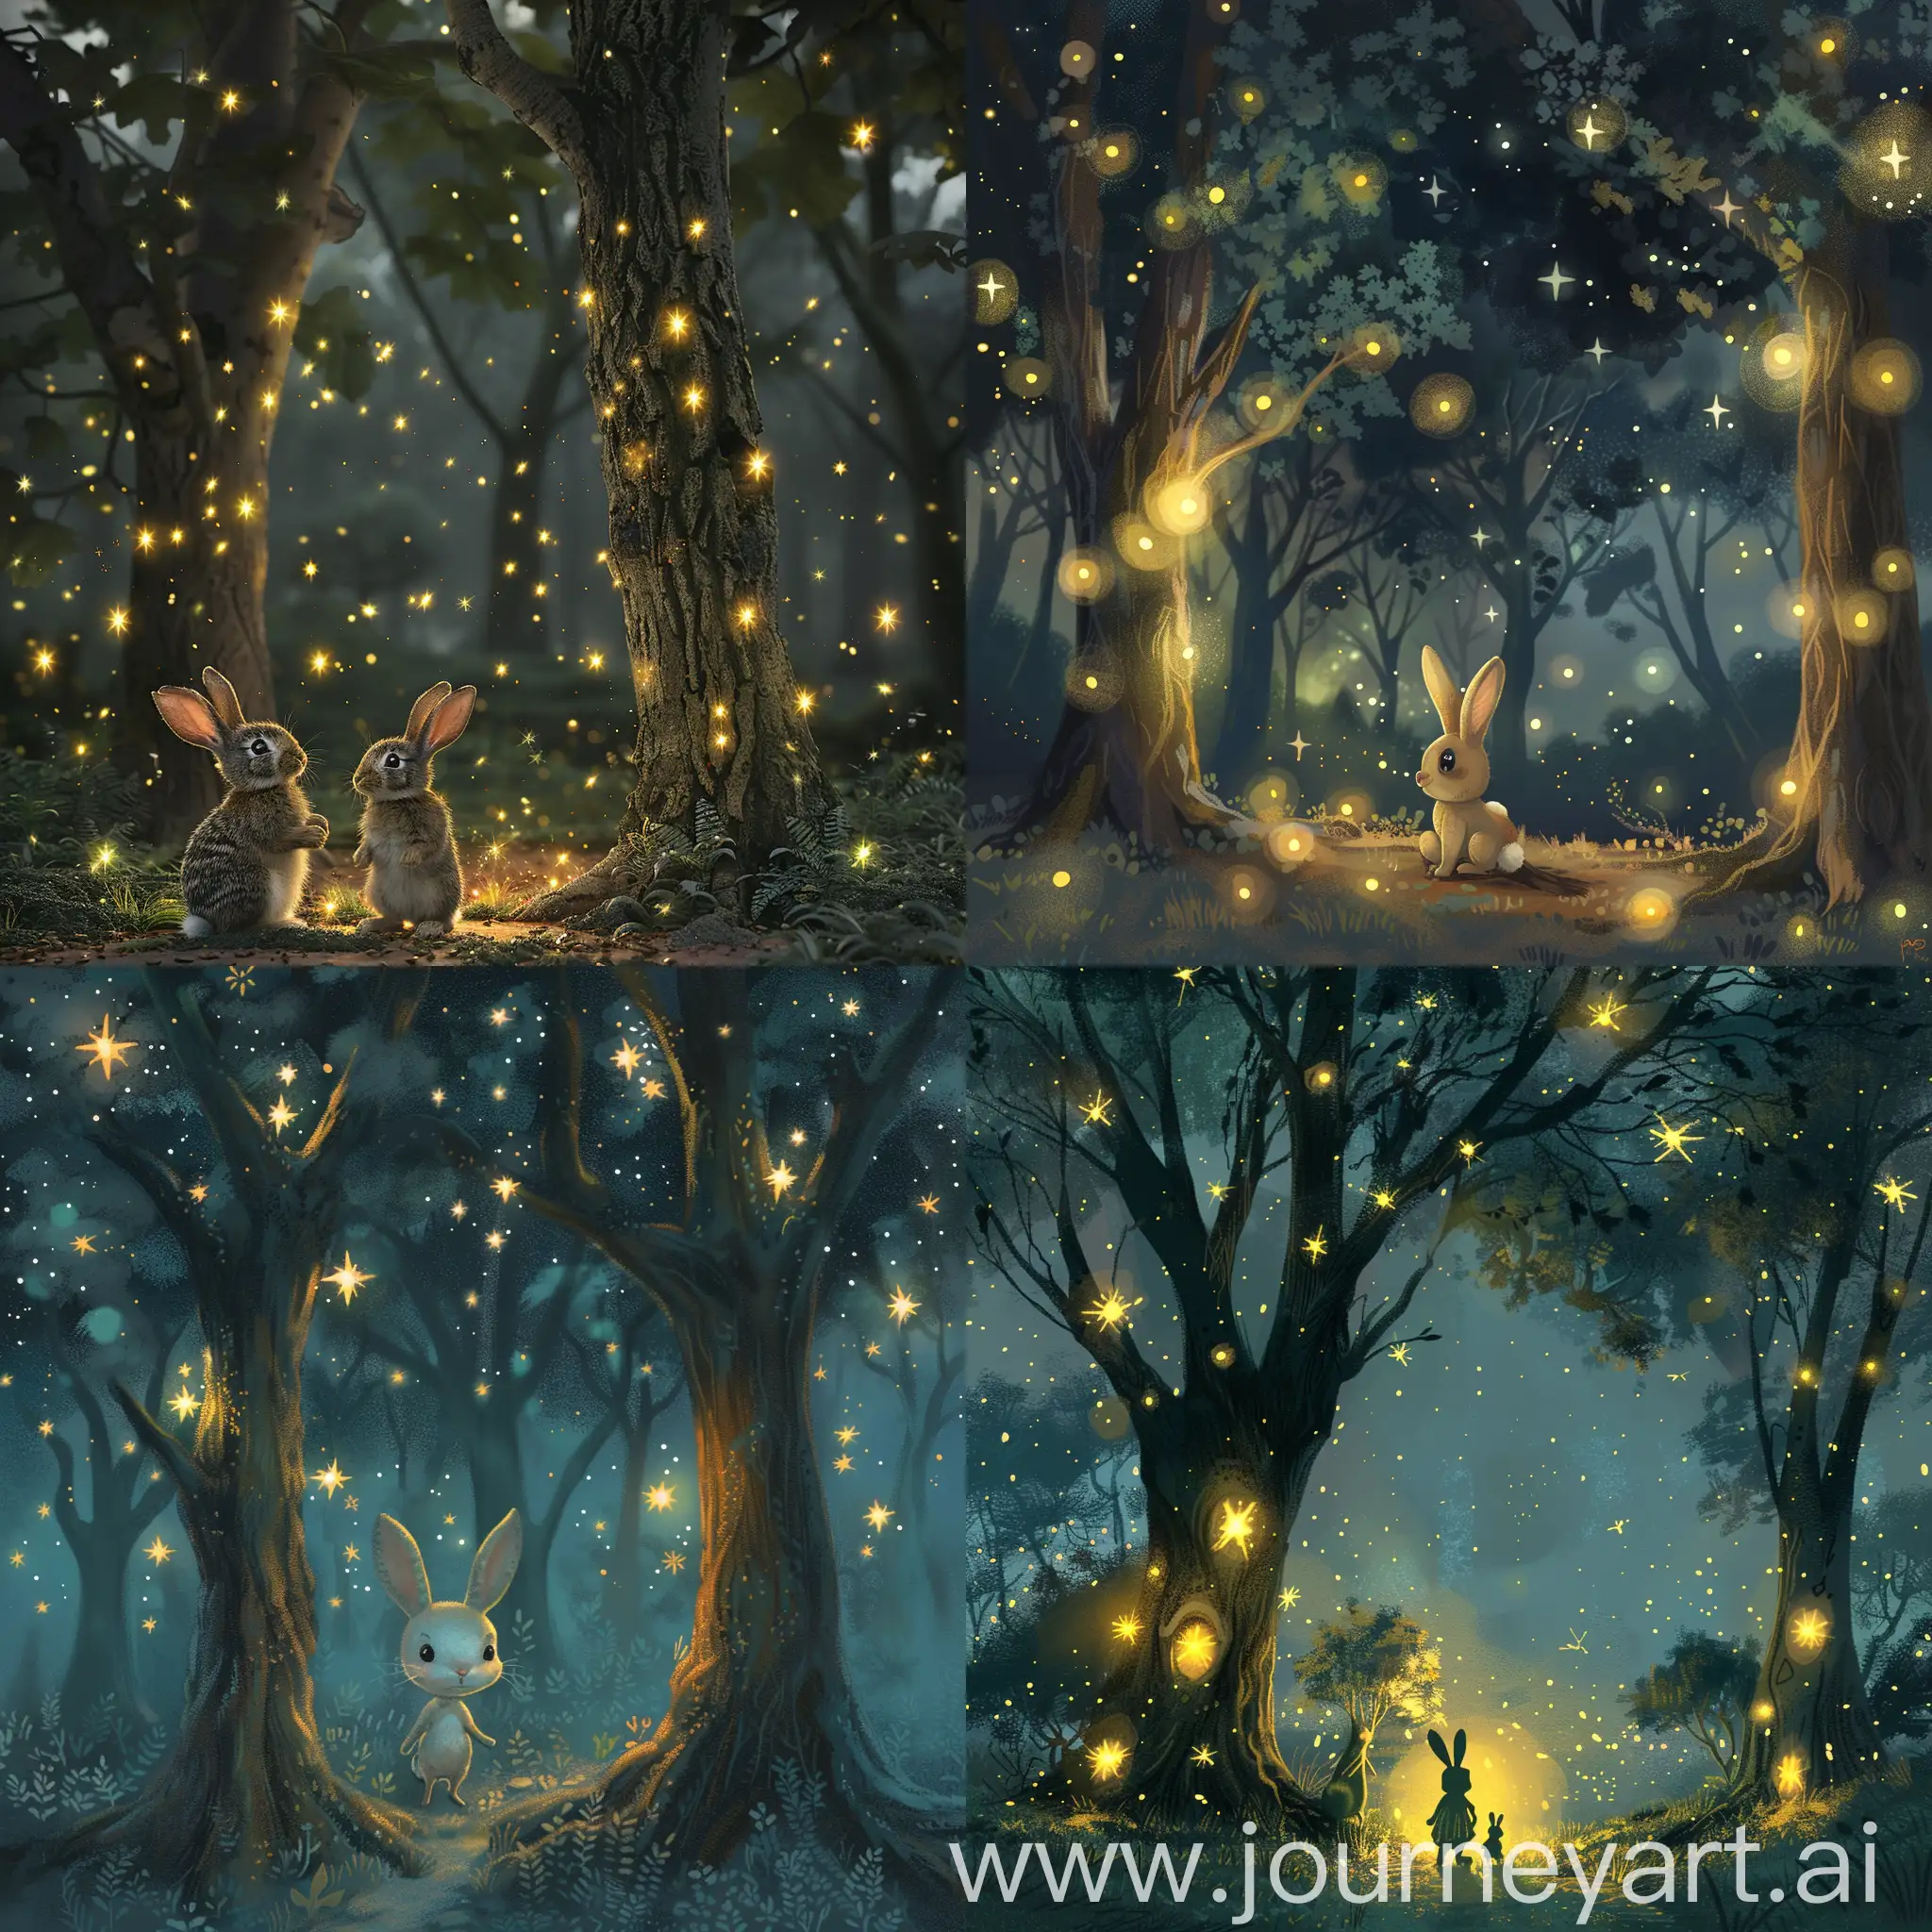 Enchanting-Forest-Life-of-Rabbit-Family-Tao-Tao-and-Parents-Amidst-Magical-Glow